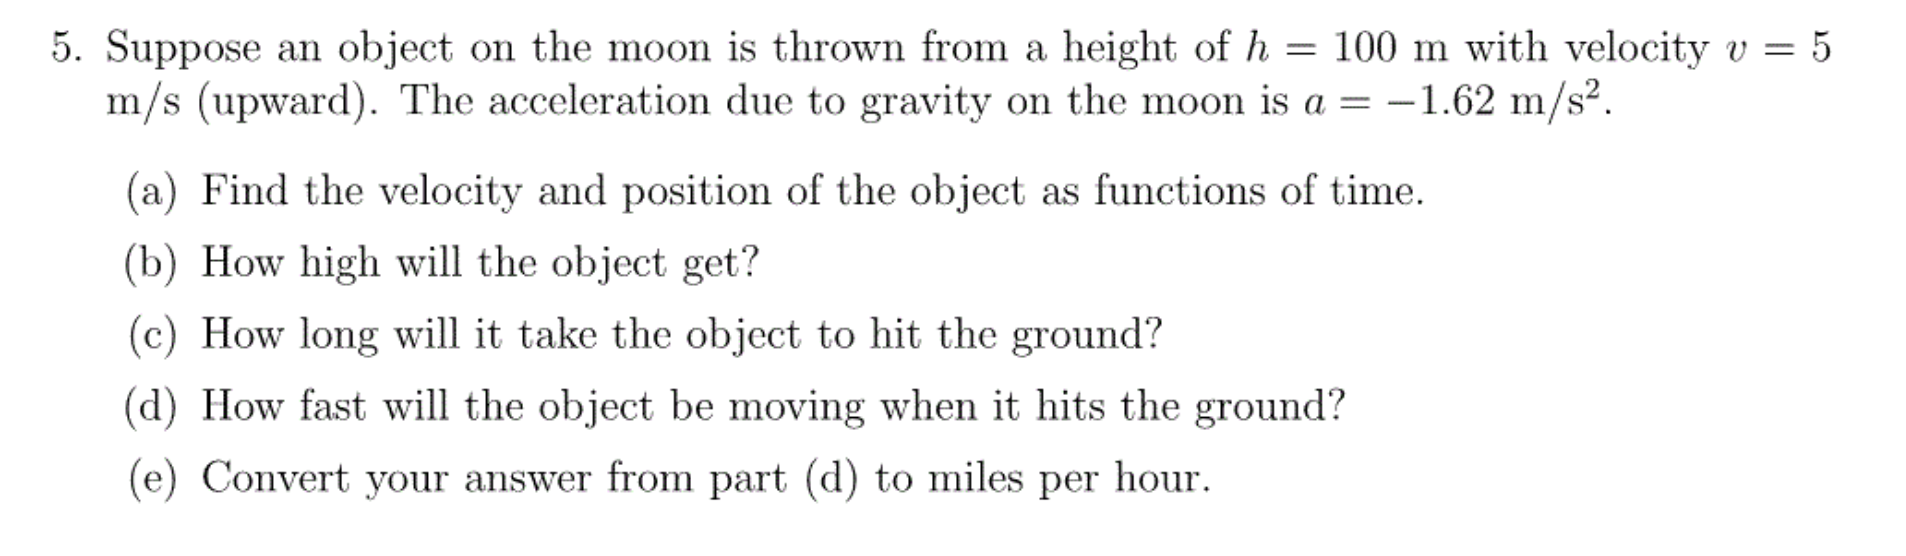 5. Suppose an object on the moon is thrown from a height of h = 100 m with velocity v
m/s (upward). The acceleration due to gravity on the moon is a = -1.62 m/s2.
5
(a) Find the velocity and position of the object as functions of time
(b) How high will the object get?
(c) How long will it take the object to hit the ground?
(d) How fast will the object be moving when it hits the ground?
(e) Convert your answer from part (d) to miles per hour
